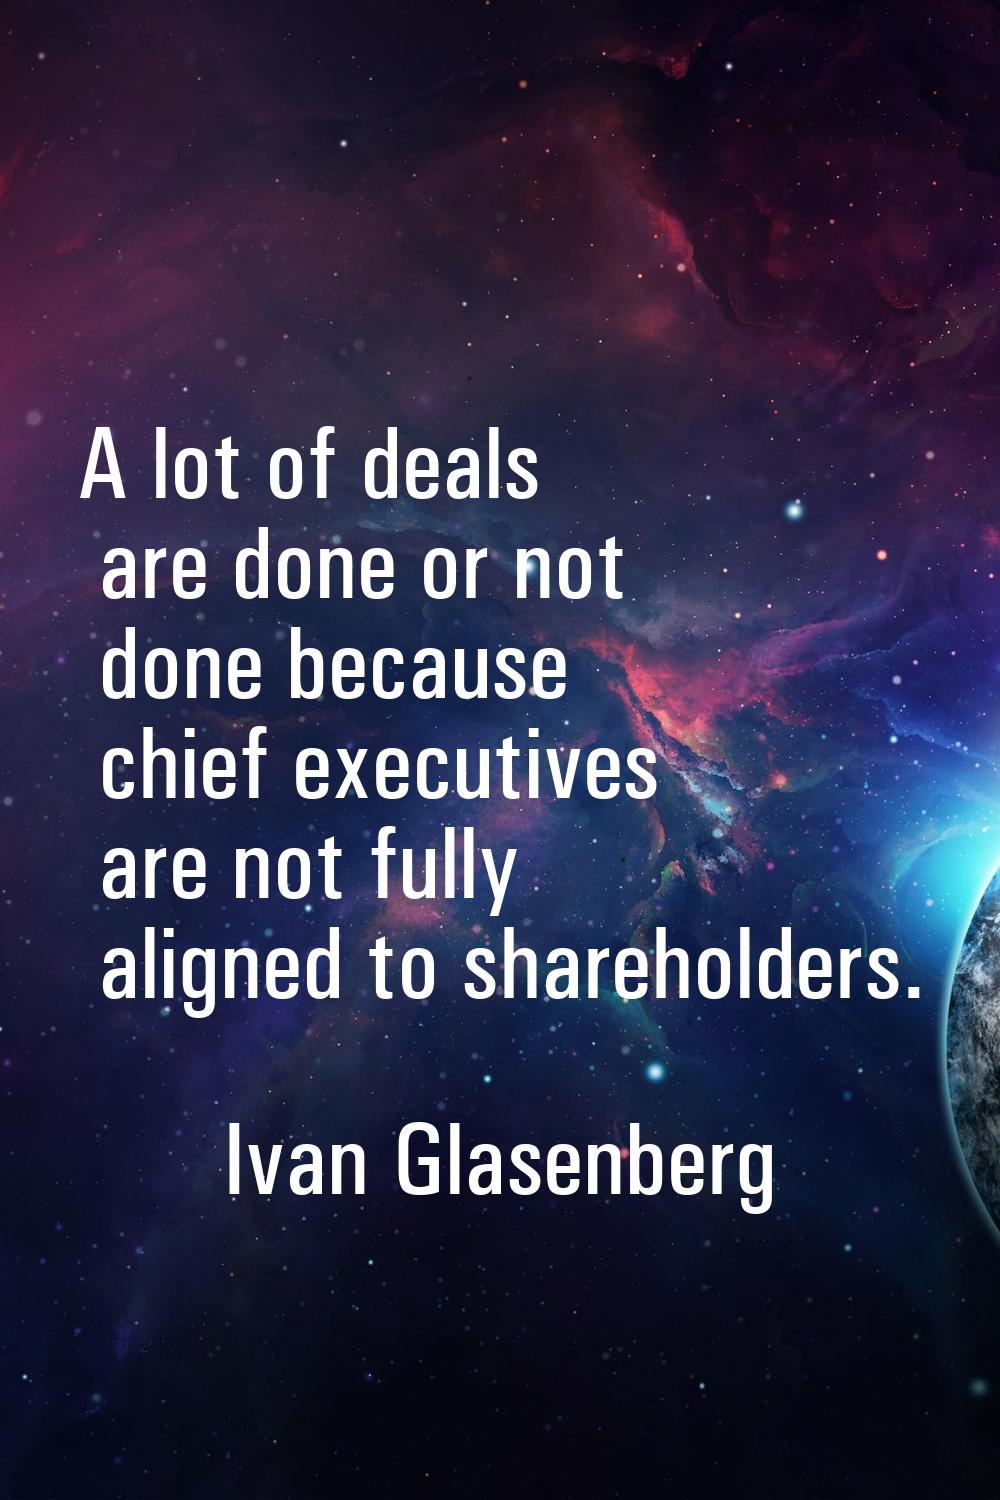 A lot of deals are done or not done because chief executives are not fully aligned to shareholders.